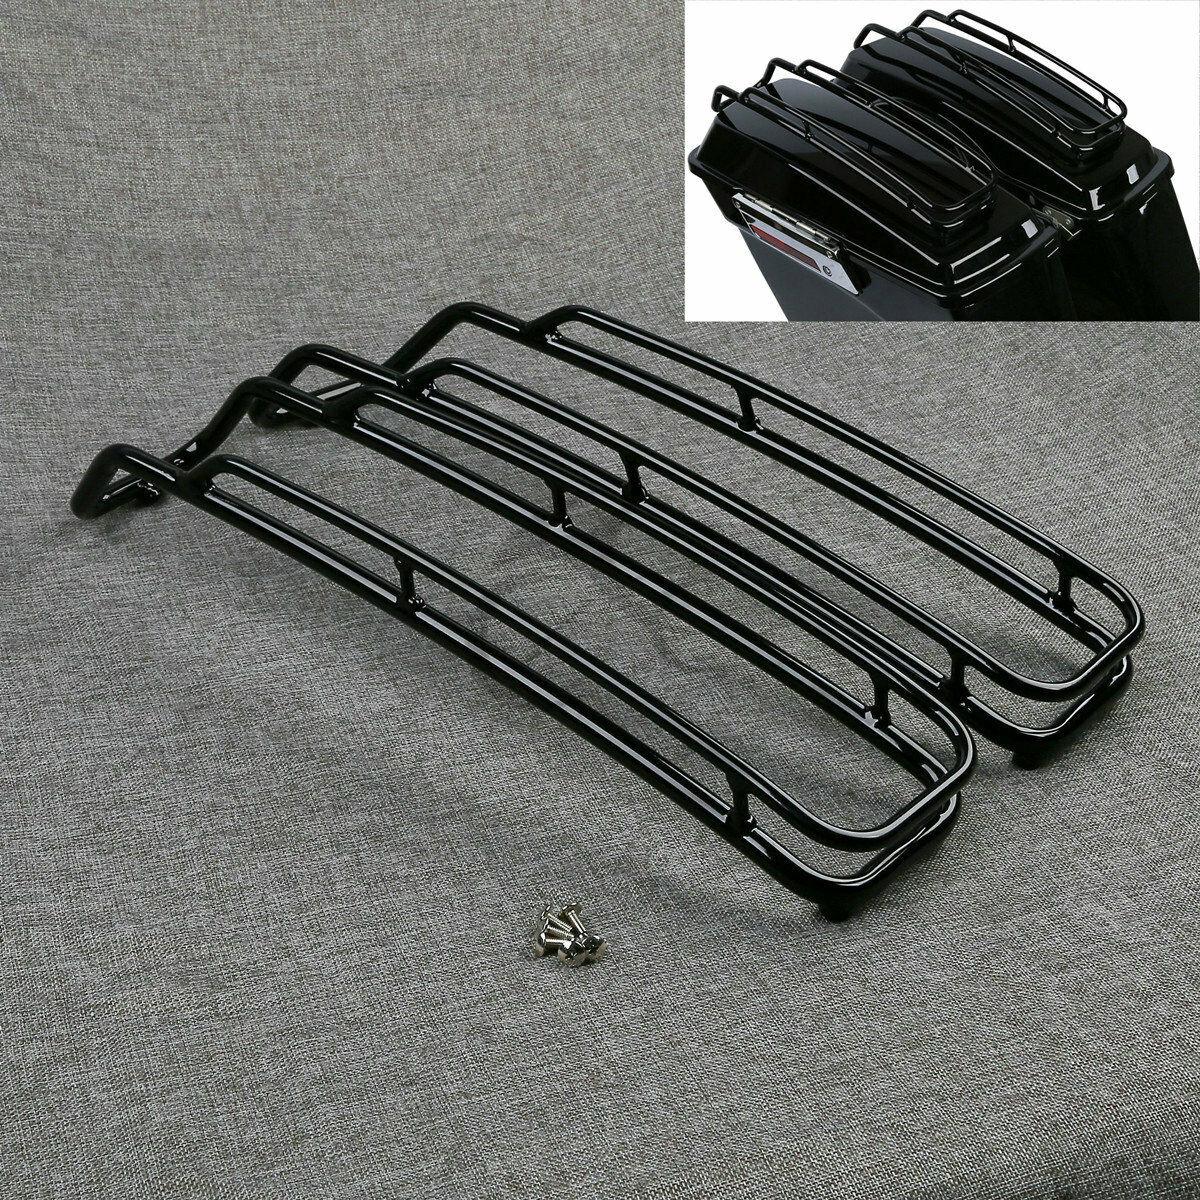 Black Saddlebag Lid Top Rail Guards For Harley Touring Road Glide 1994-2013 - Moto Life Products